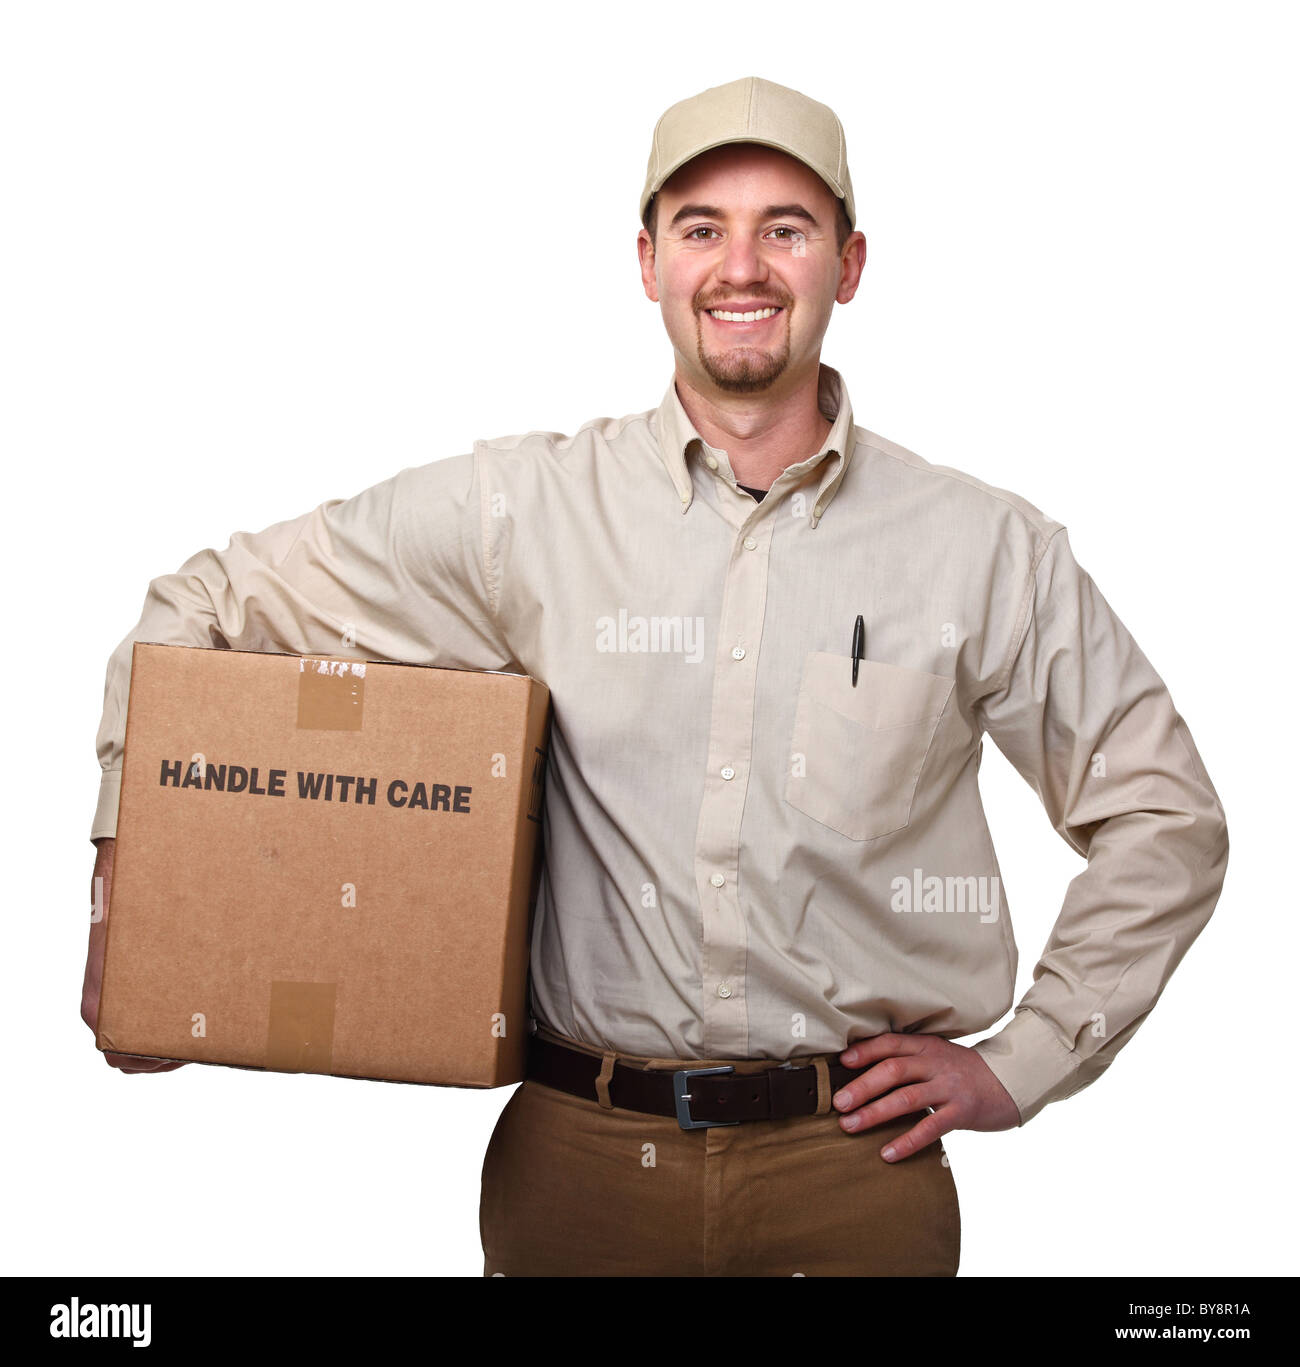 delivery man portrait on white background Stock Photo